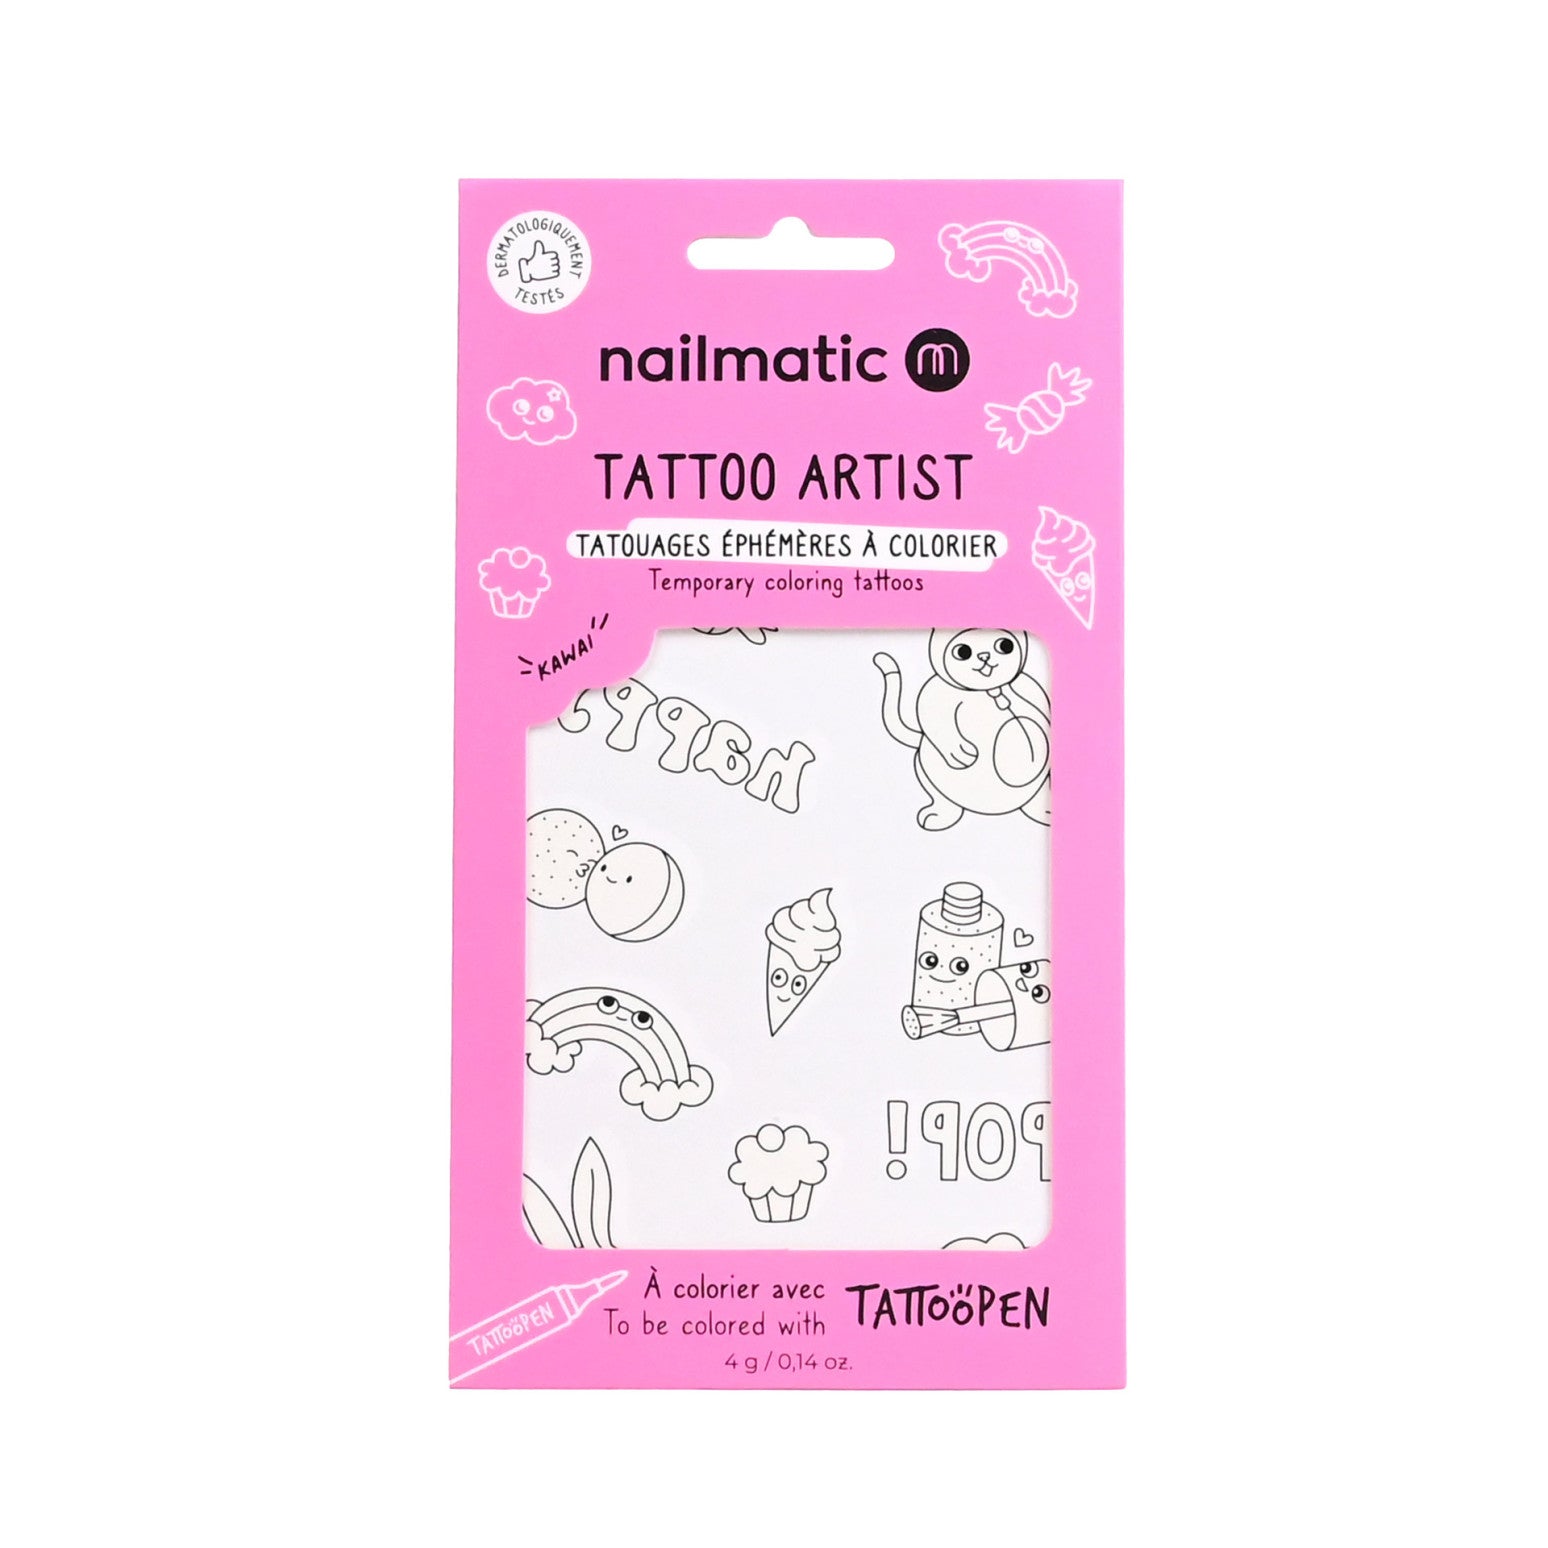 12 Tattoos to color - Nailmatic